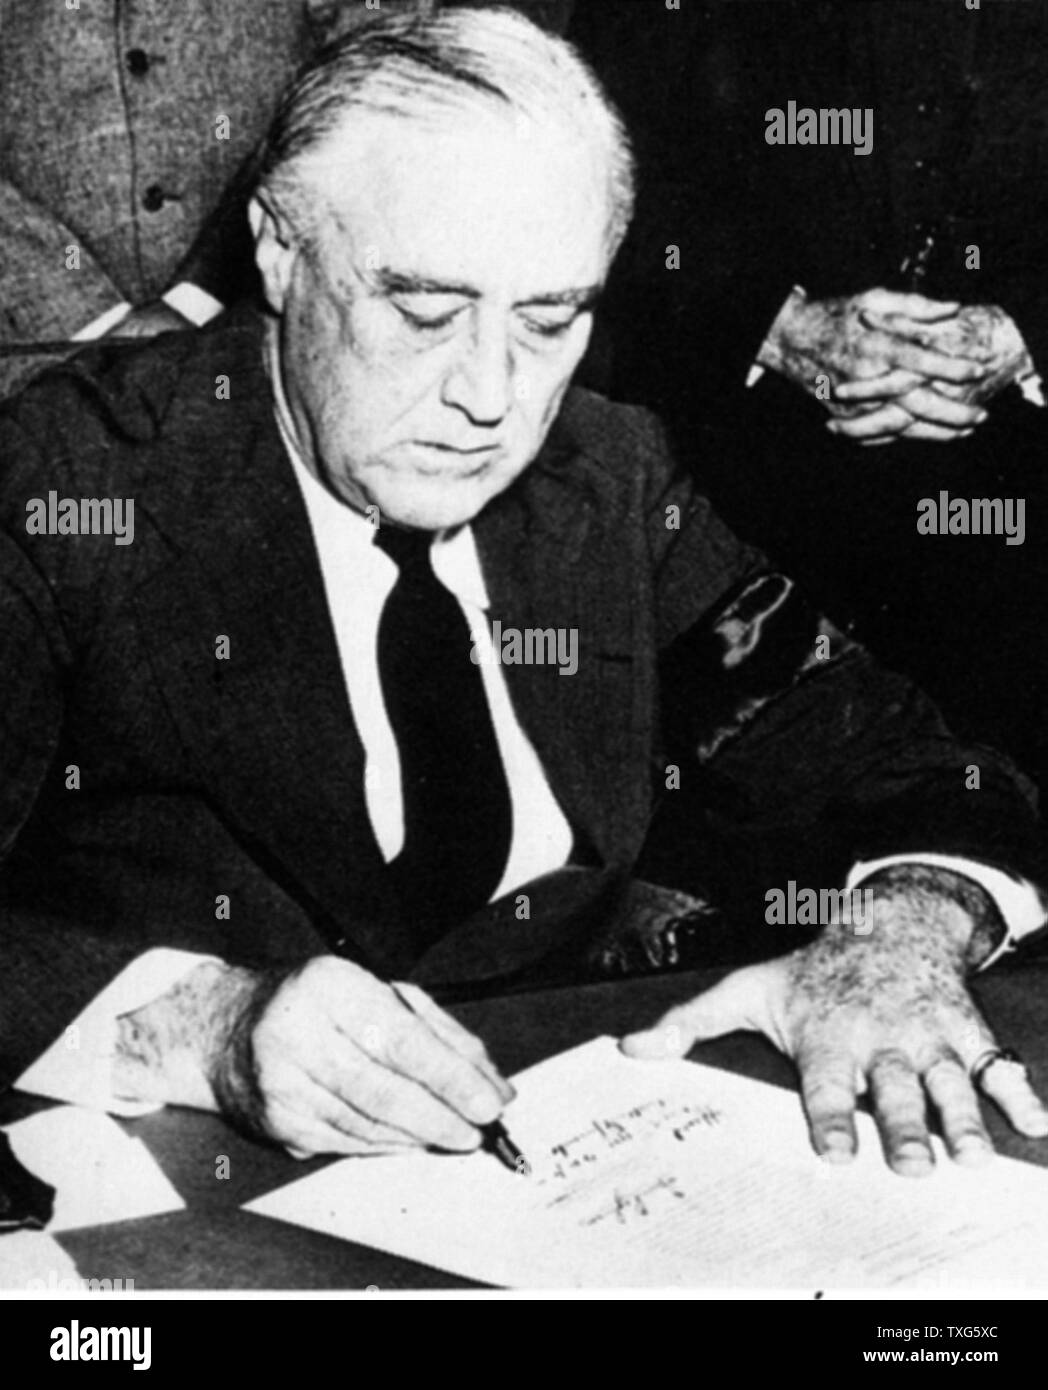 Franklin Delano Roosevelt, 32nd President of the United States of America (1933-1945), signing the declaration of war against Japan, 8 December 1941 Stock Photo